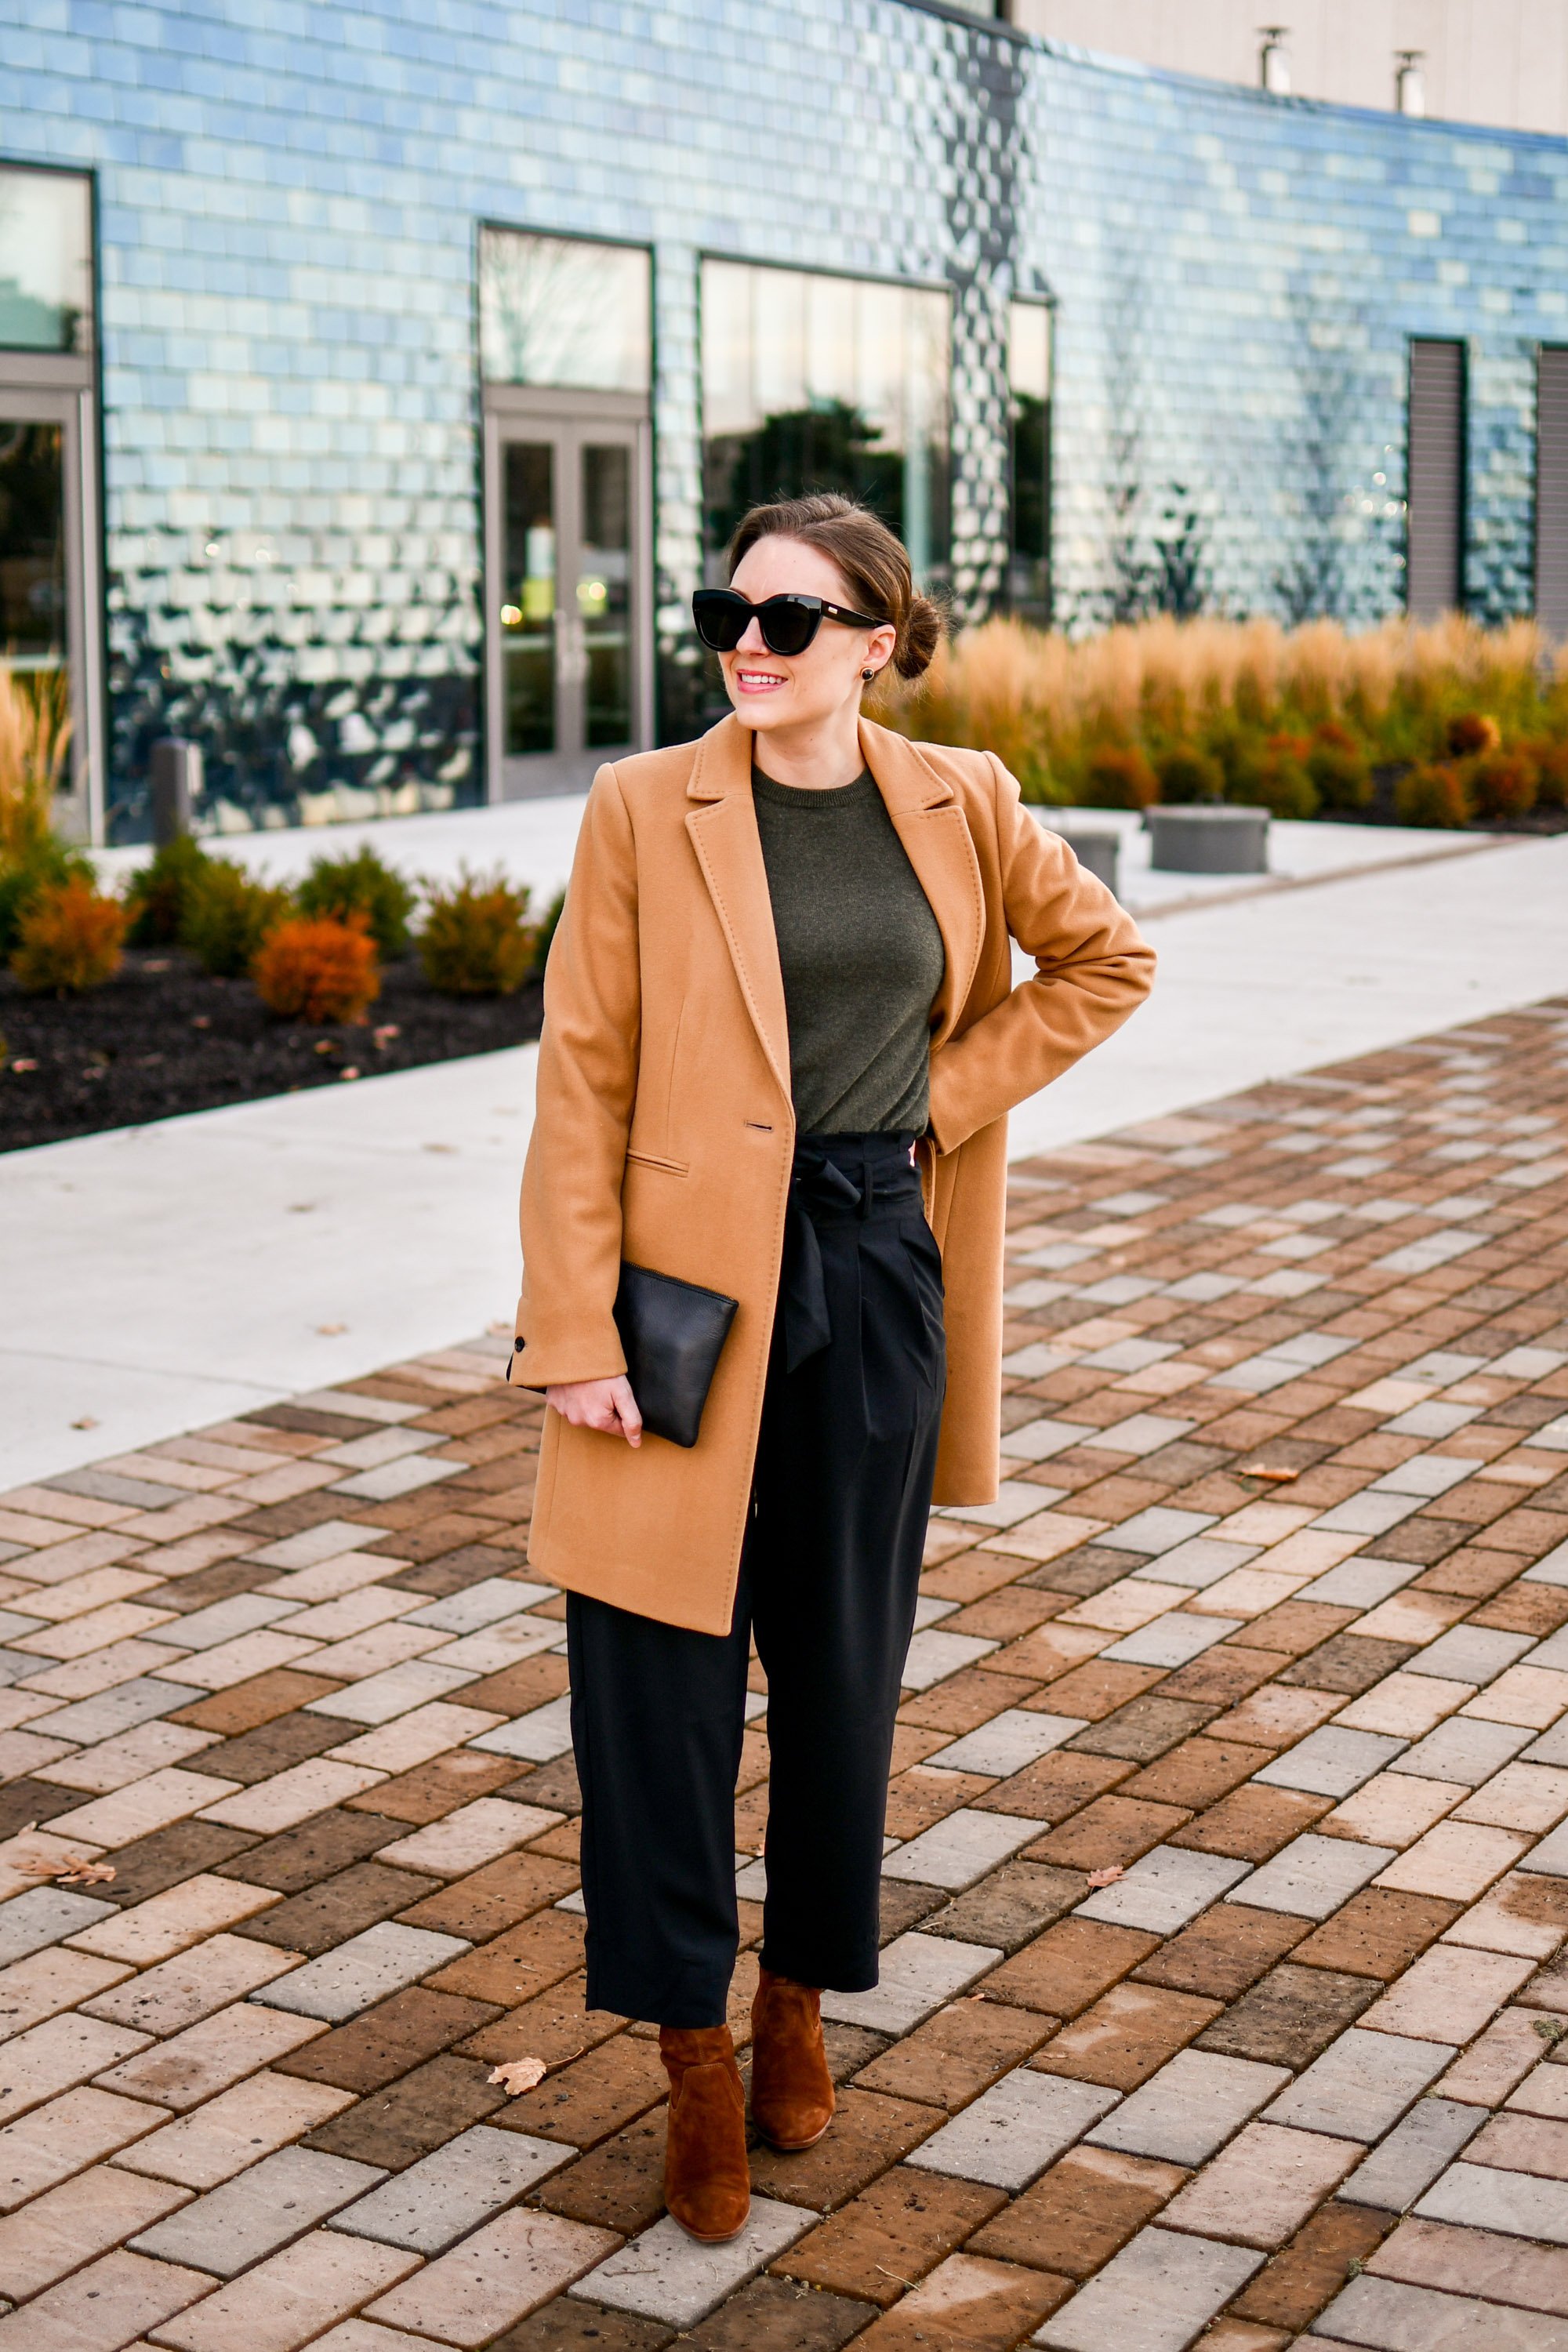 How to Dress Smart Casual in the Winter (+ 16 Outfit Ideas!)